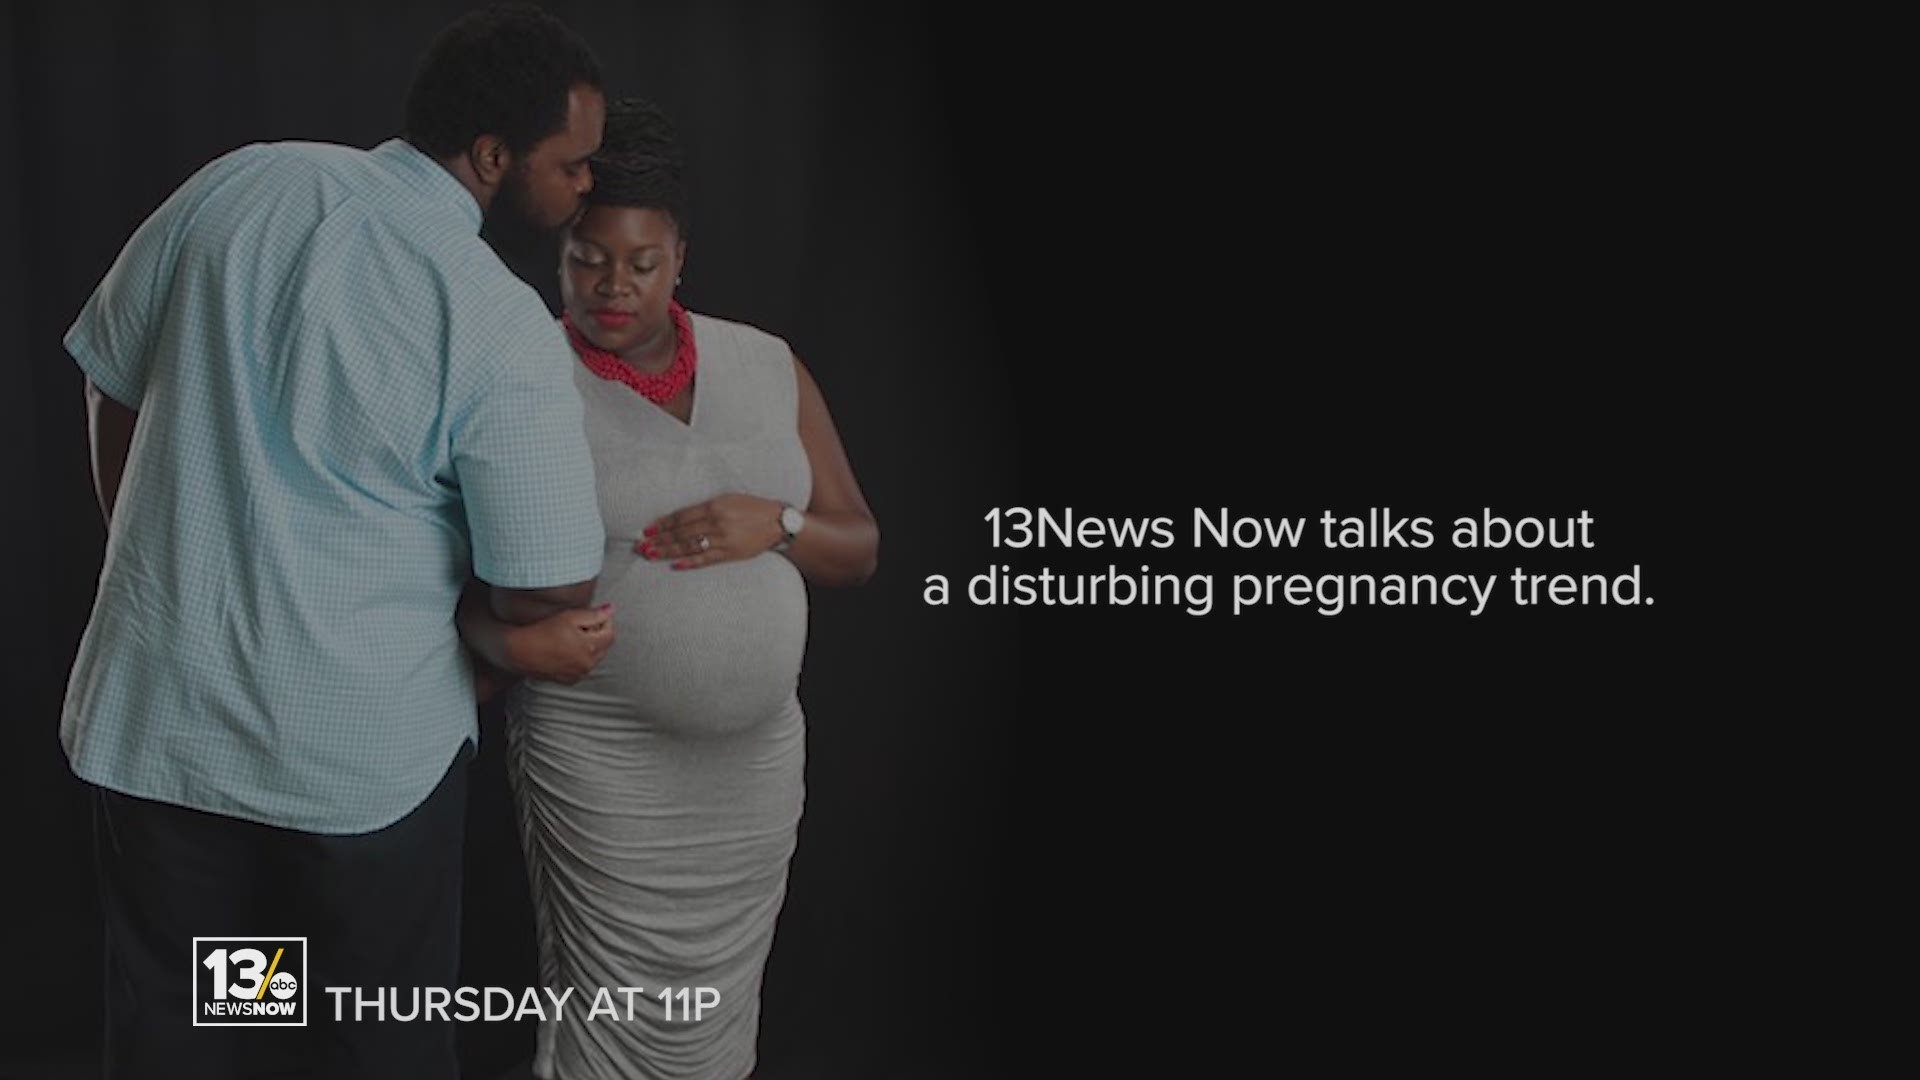 Pregnancy-related deaths are increasing in the U.S., more than any other country in the developed world. Here in Virginia, black women are dying at a rate nearly two and a half times that of white women.